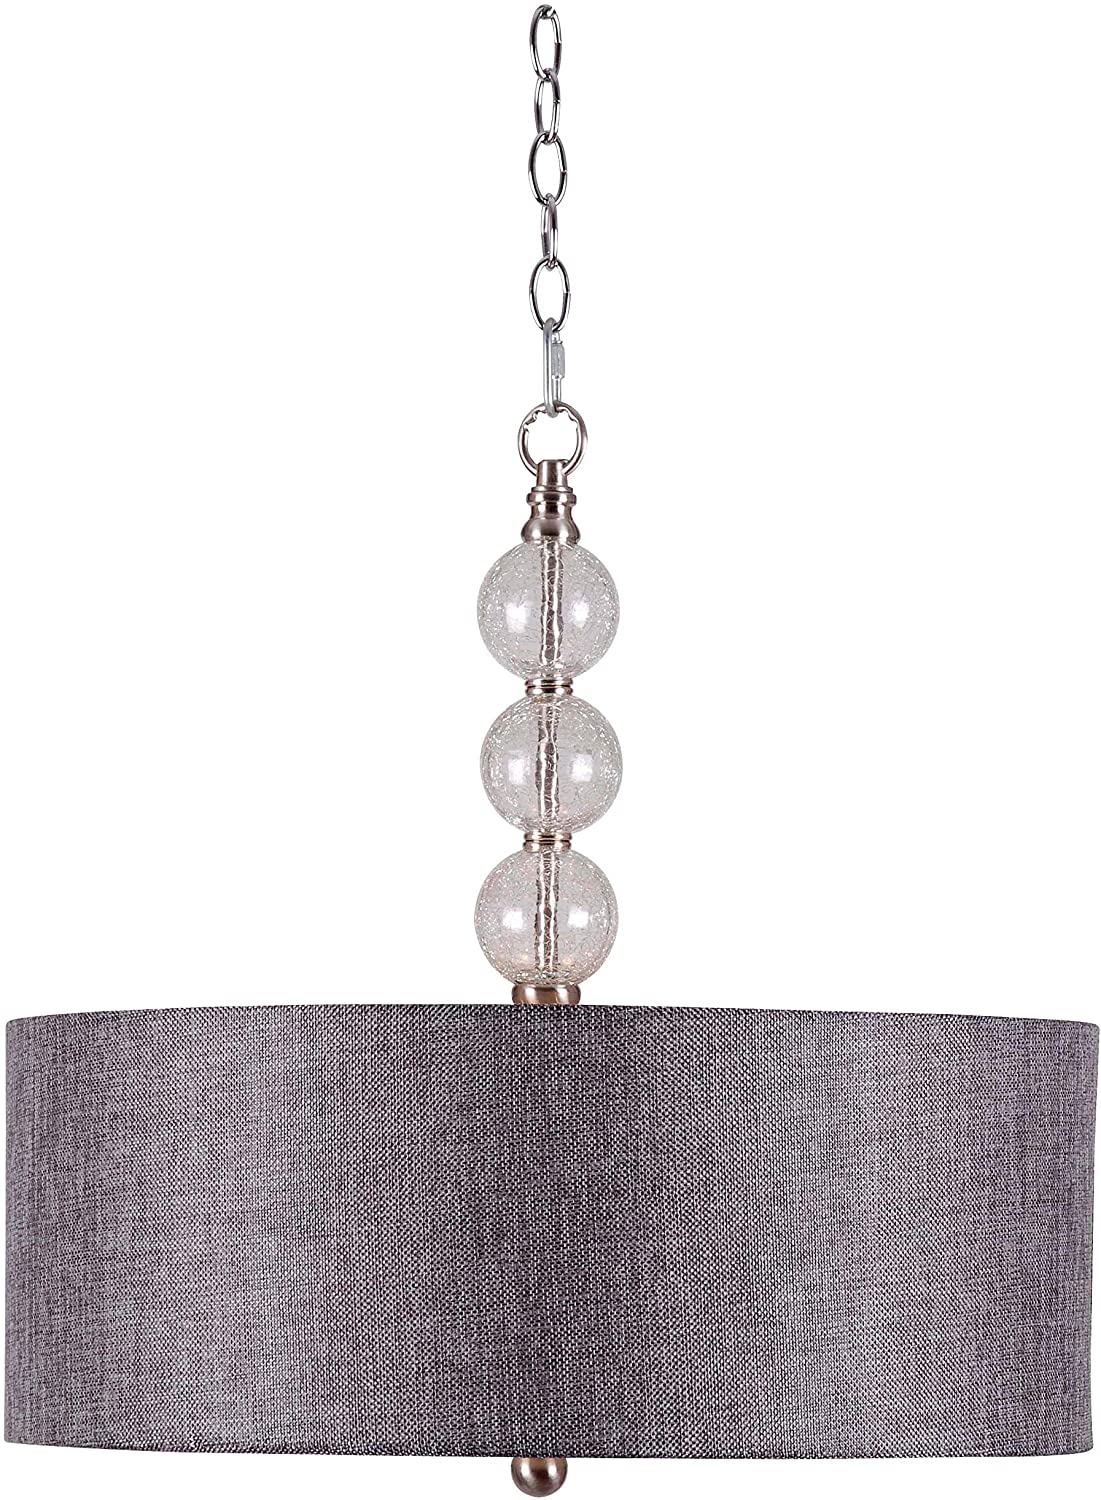 Kenroy Home 93313BS Maya 3-Light Pendant with Clear Crackle Glass Ball, Brushed Steel Finish